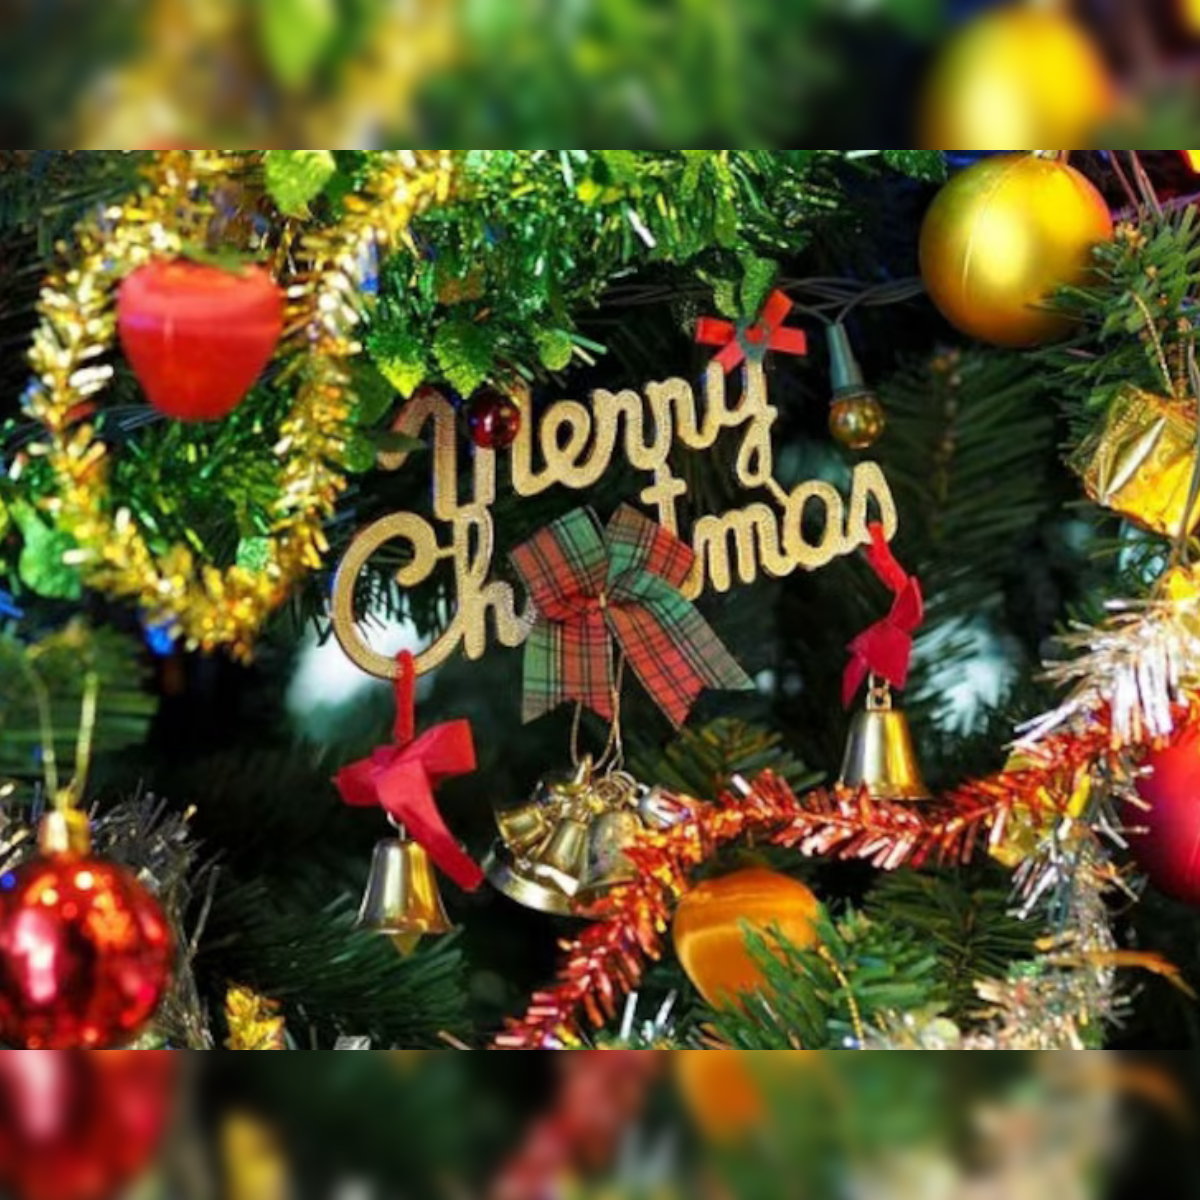 Merry Christmas Wishes: Merry Christmas! Wishes and messages you can send  to your loved ones - The Economic Times